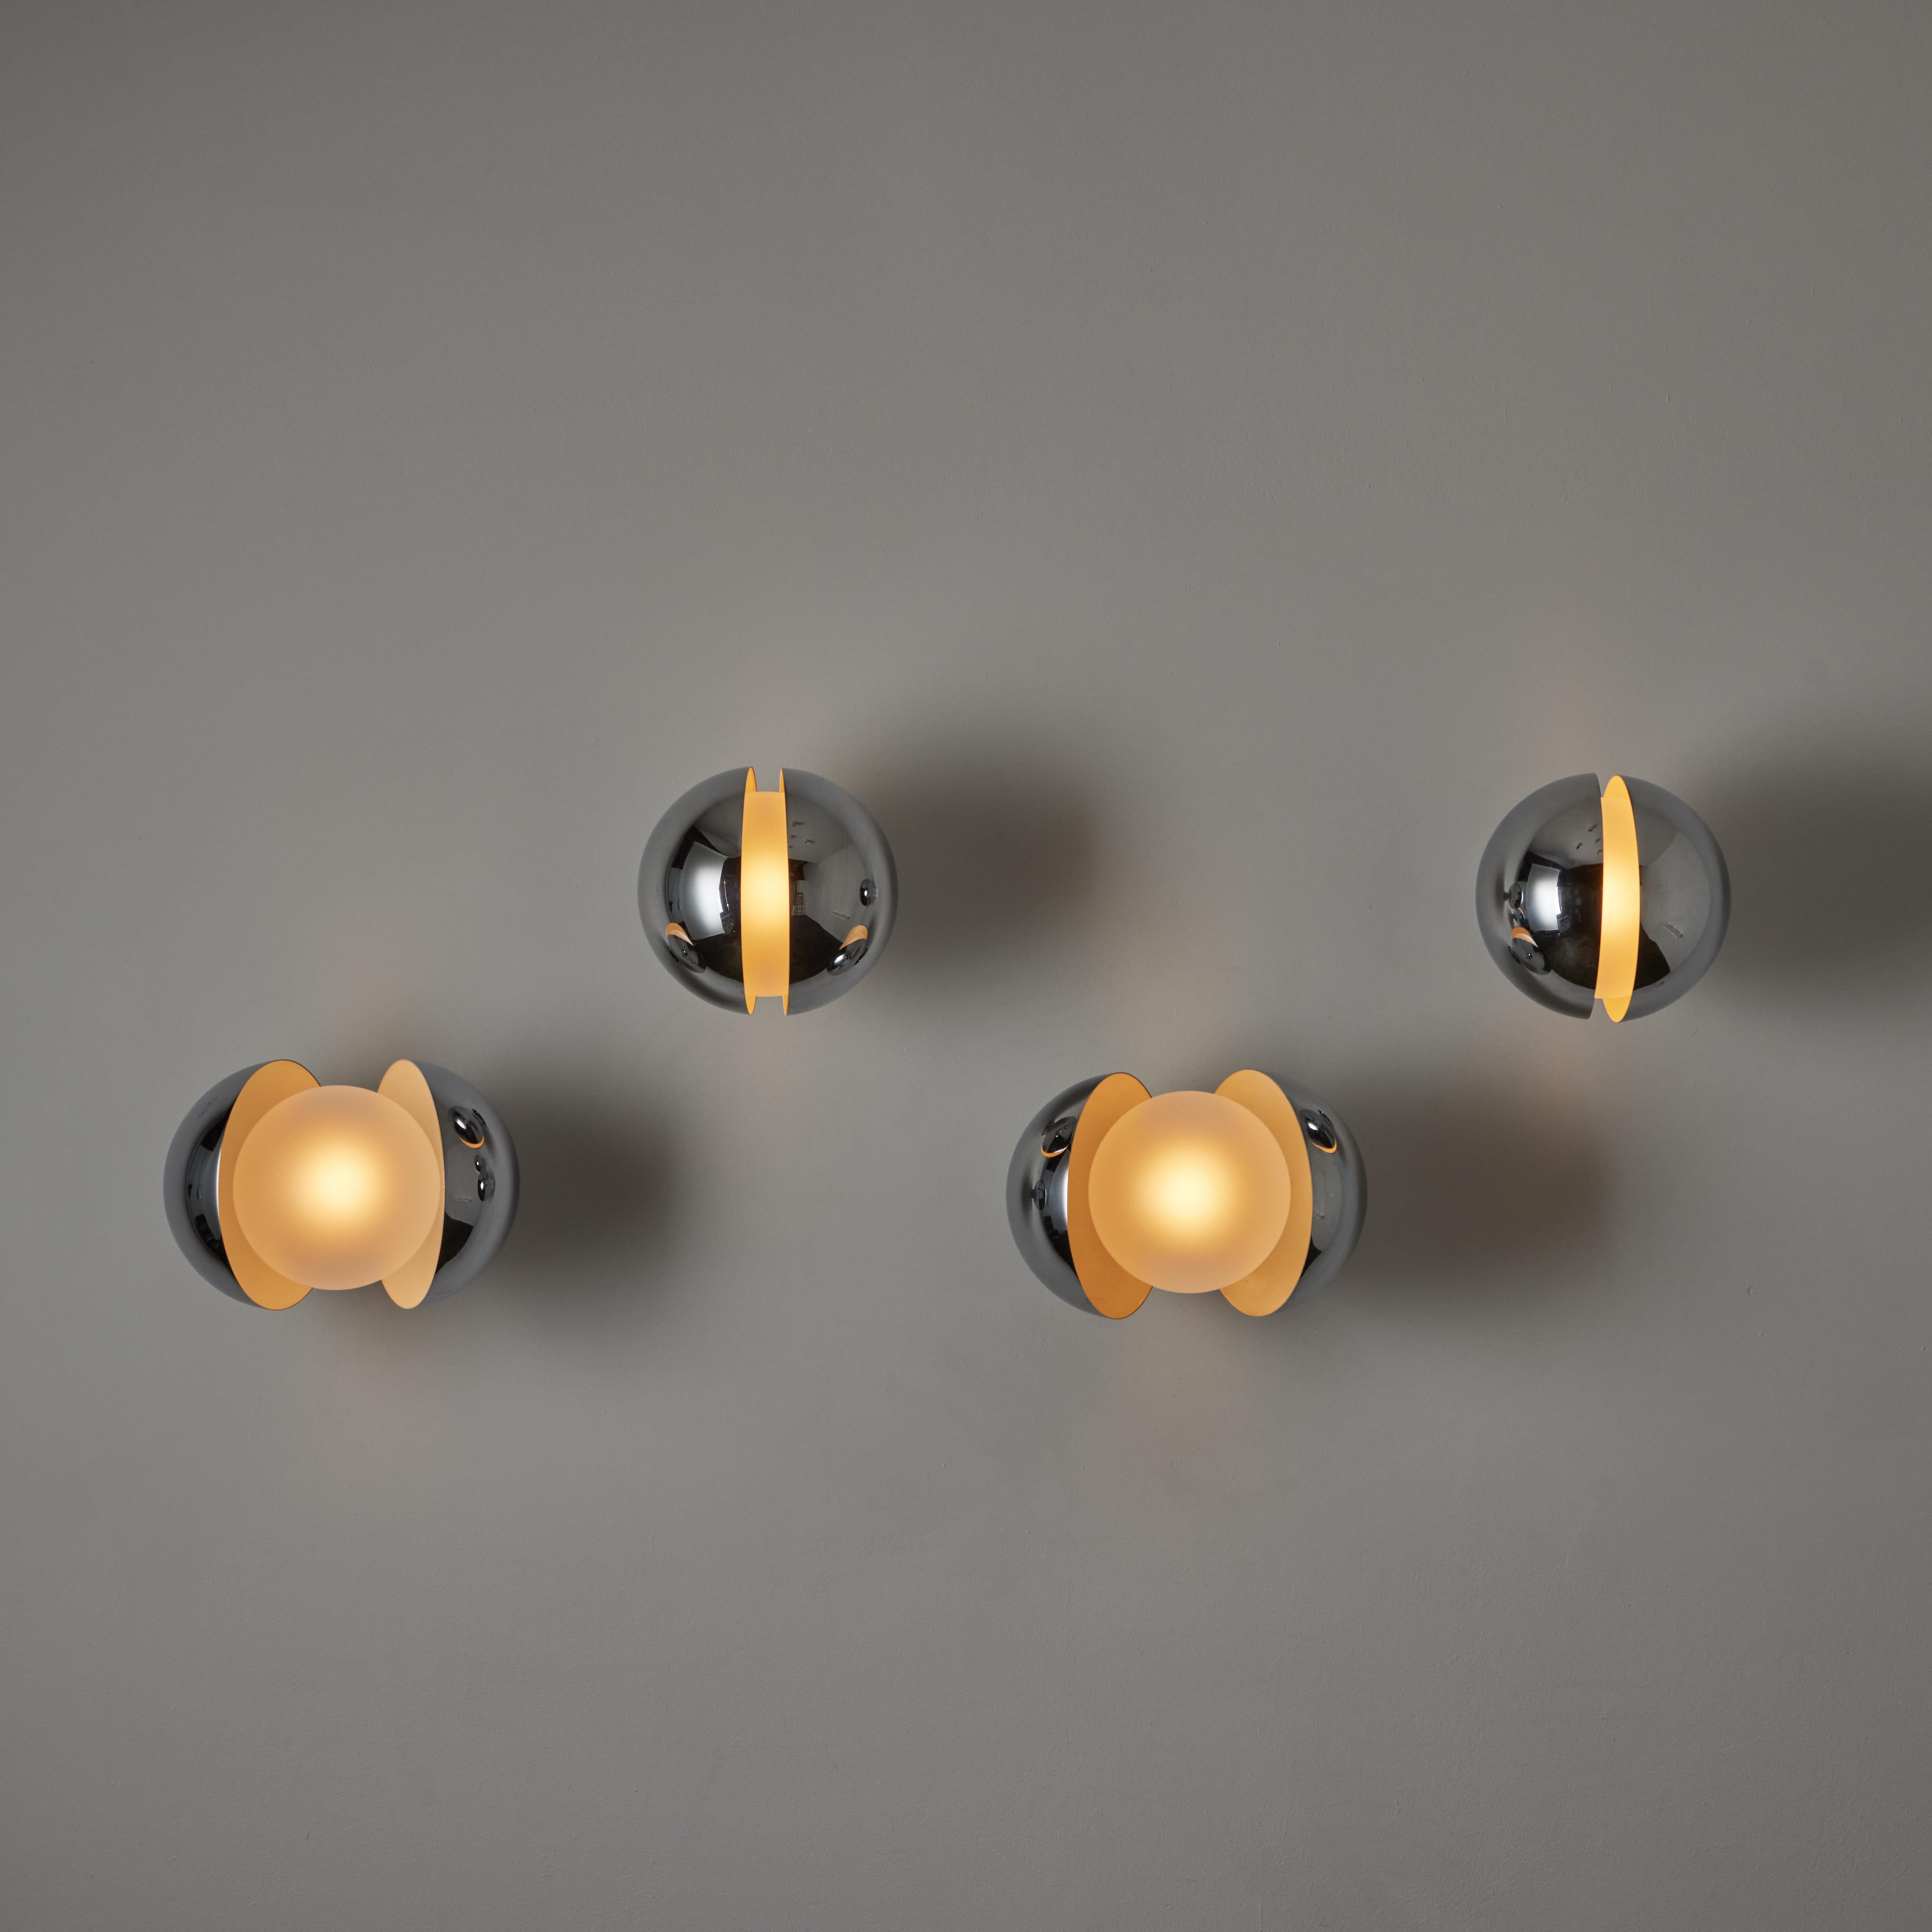 Rare 'Diaframma' Sconces by: G. Piero & A. Monti for Fontana Arte. Designed and manufactured in Italy, circa the 1960's. Butterfly sconces consisting of a chrome outer shell and clear etched glass globes. You can open and close the outer shells to